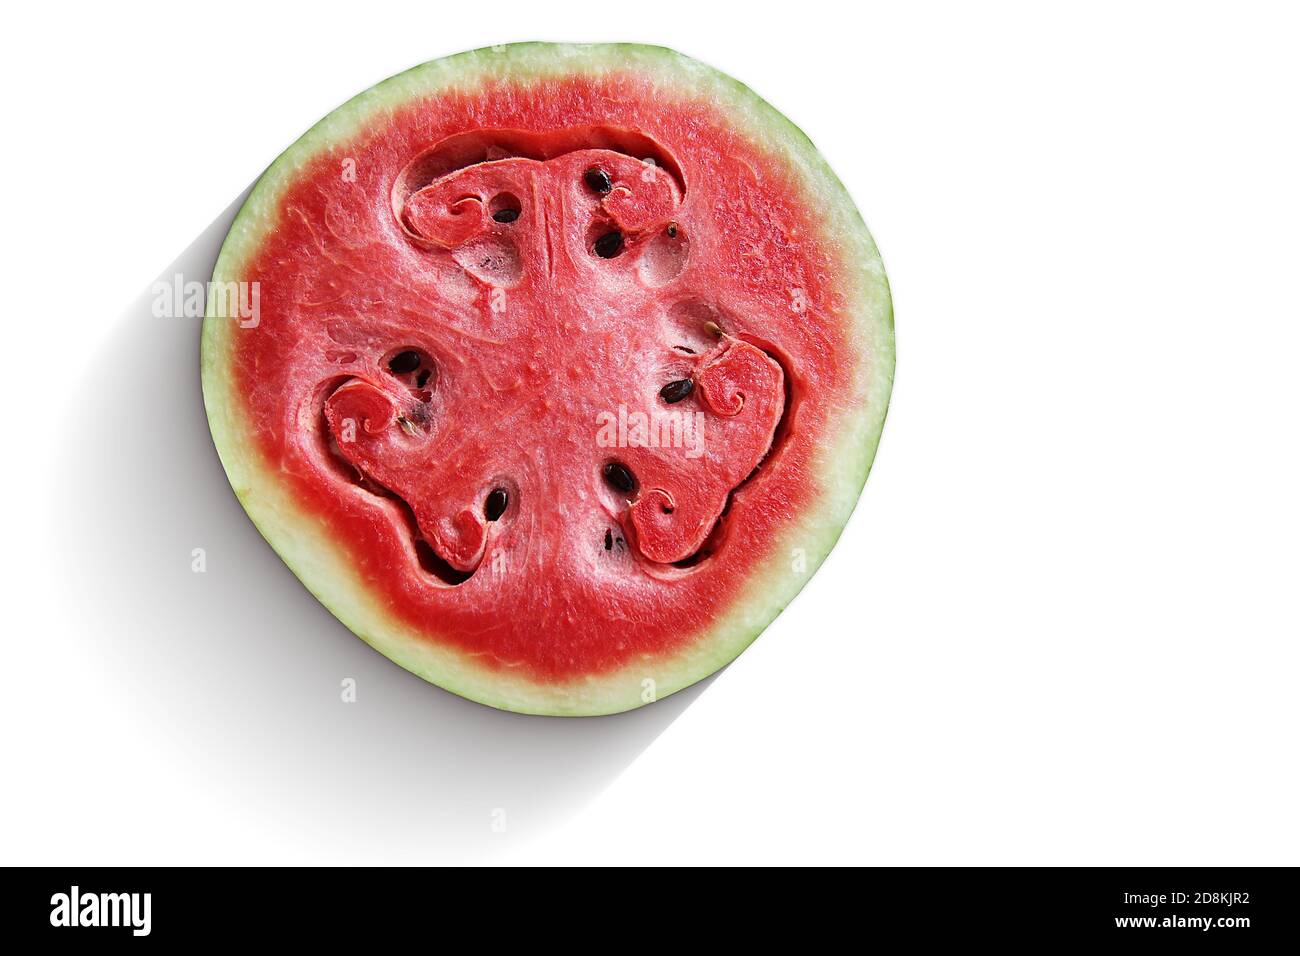 Close-up of a bright red watermelon with a sandy texture and an unusual pattern. Cut in half on a white background Stock Photo